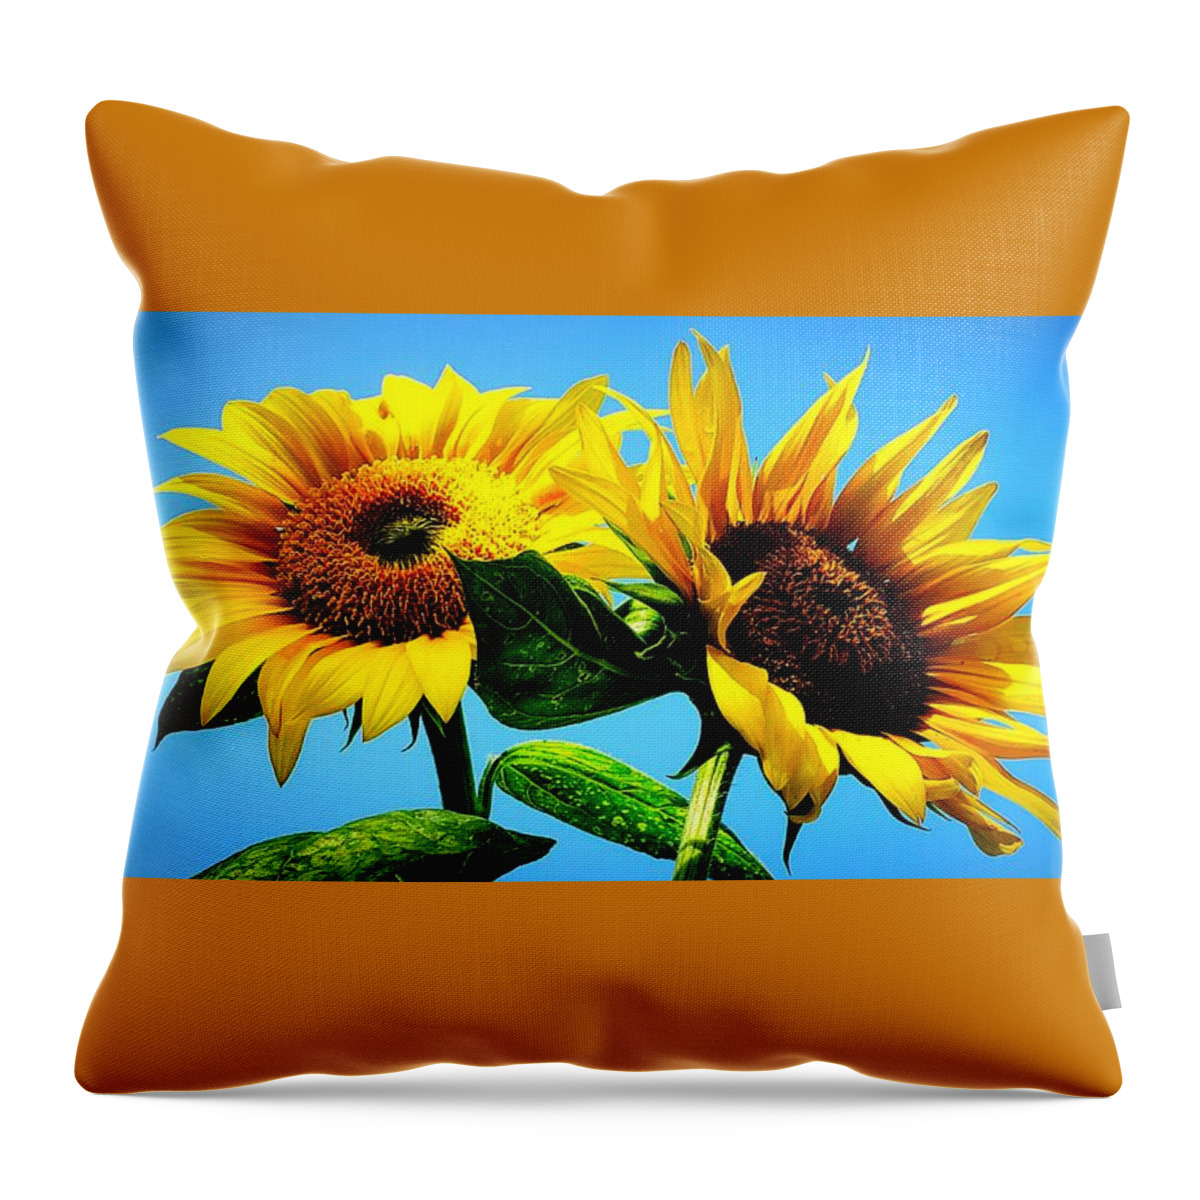 Floral Throw Pillow featuring the photograph Sunflower Duo by Alexis King-Glandon